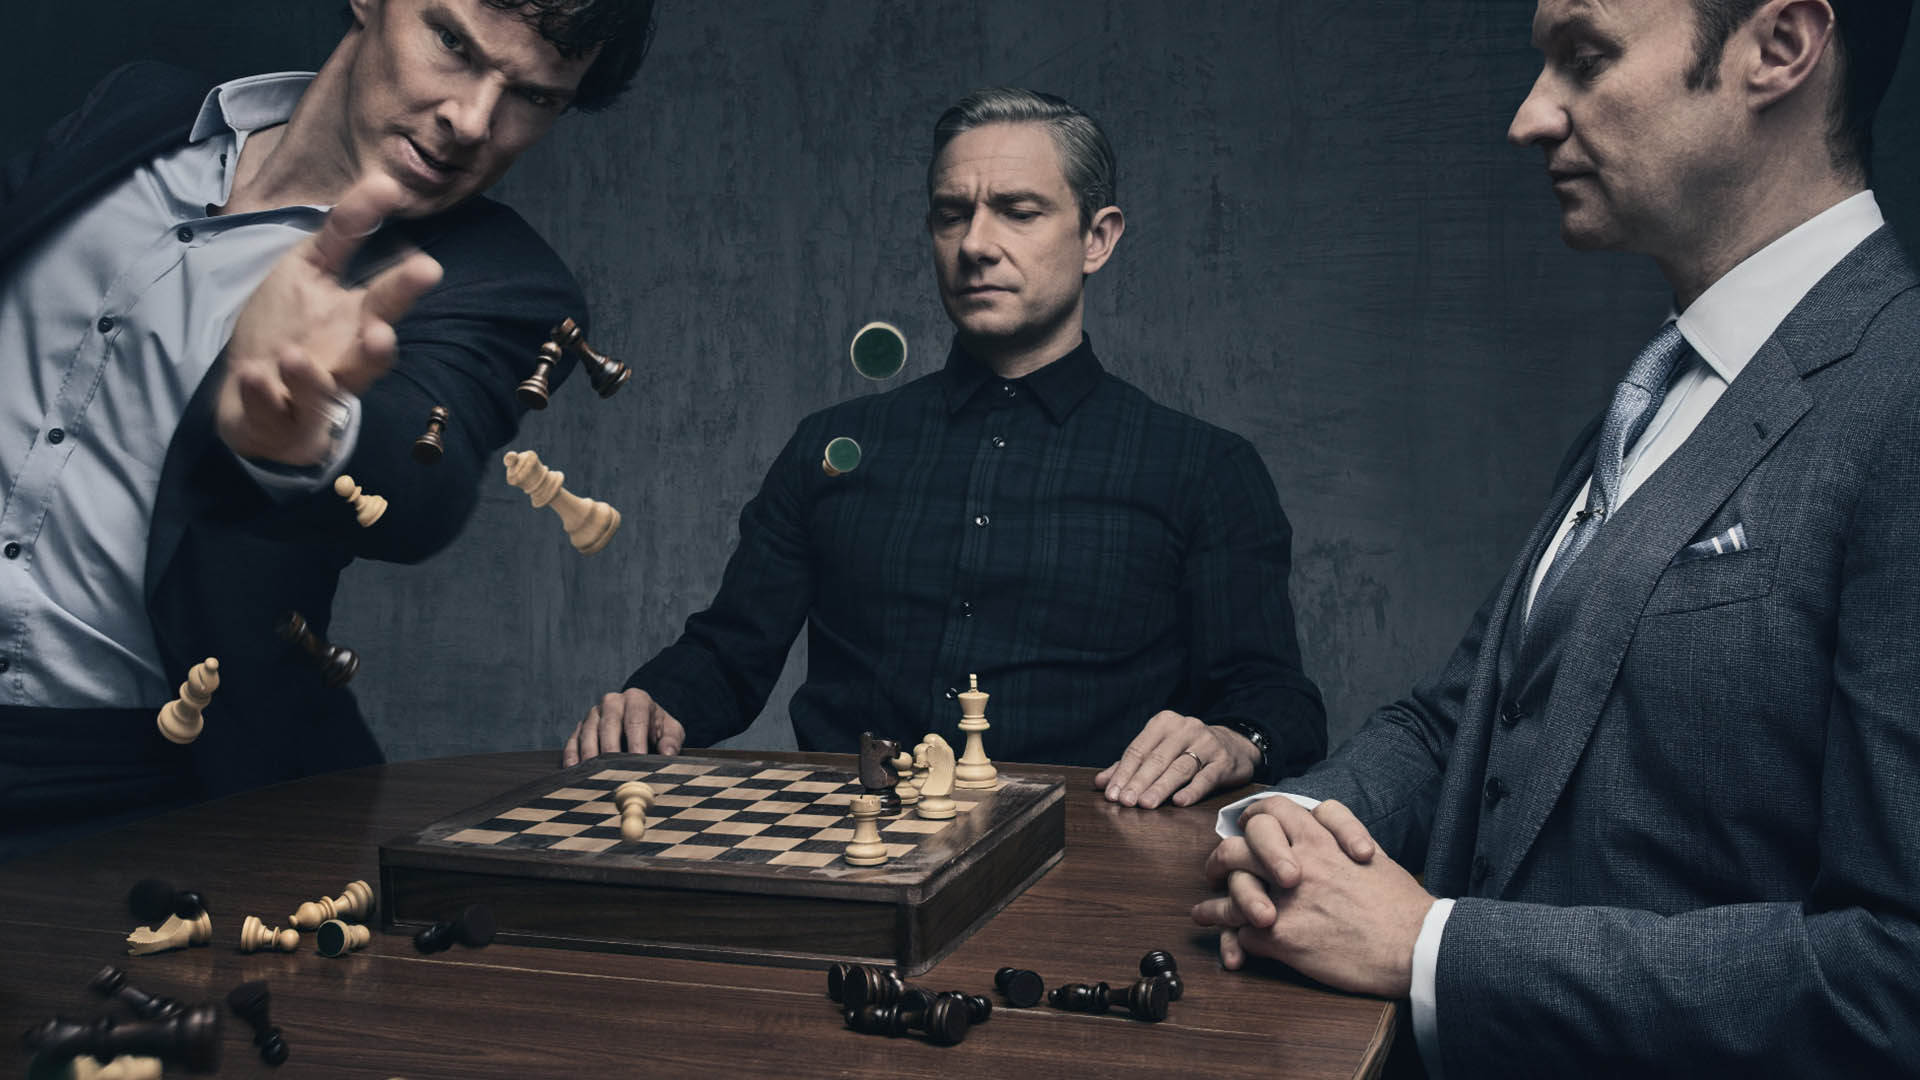 The main characters of the Sherlock series are playing chess